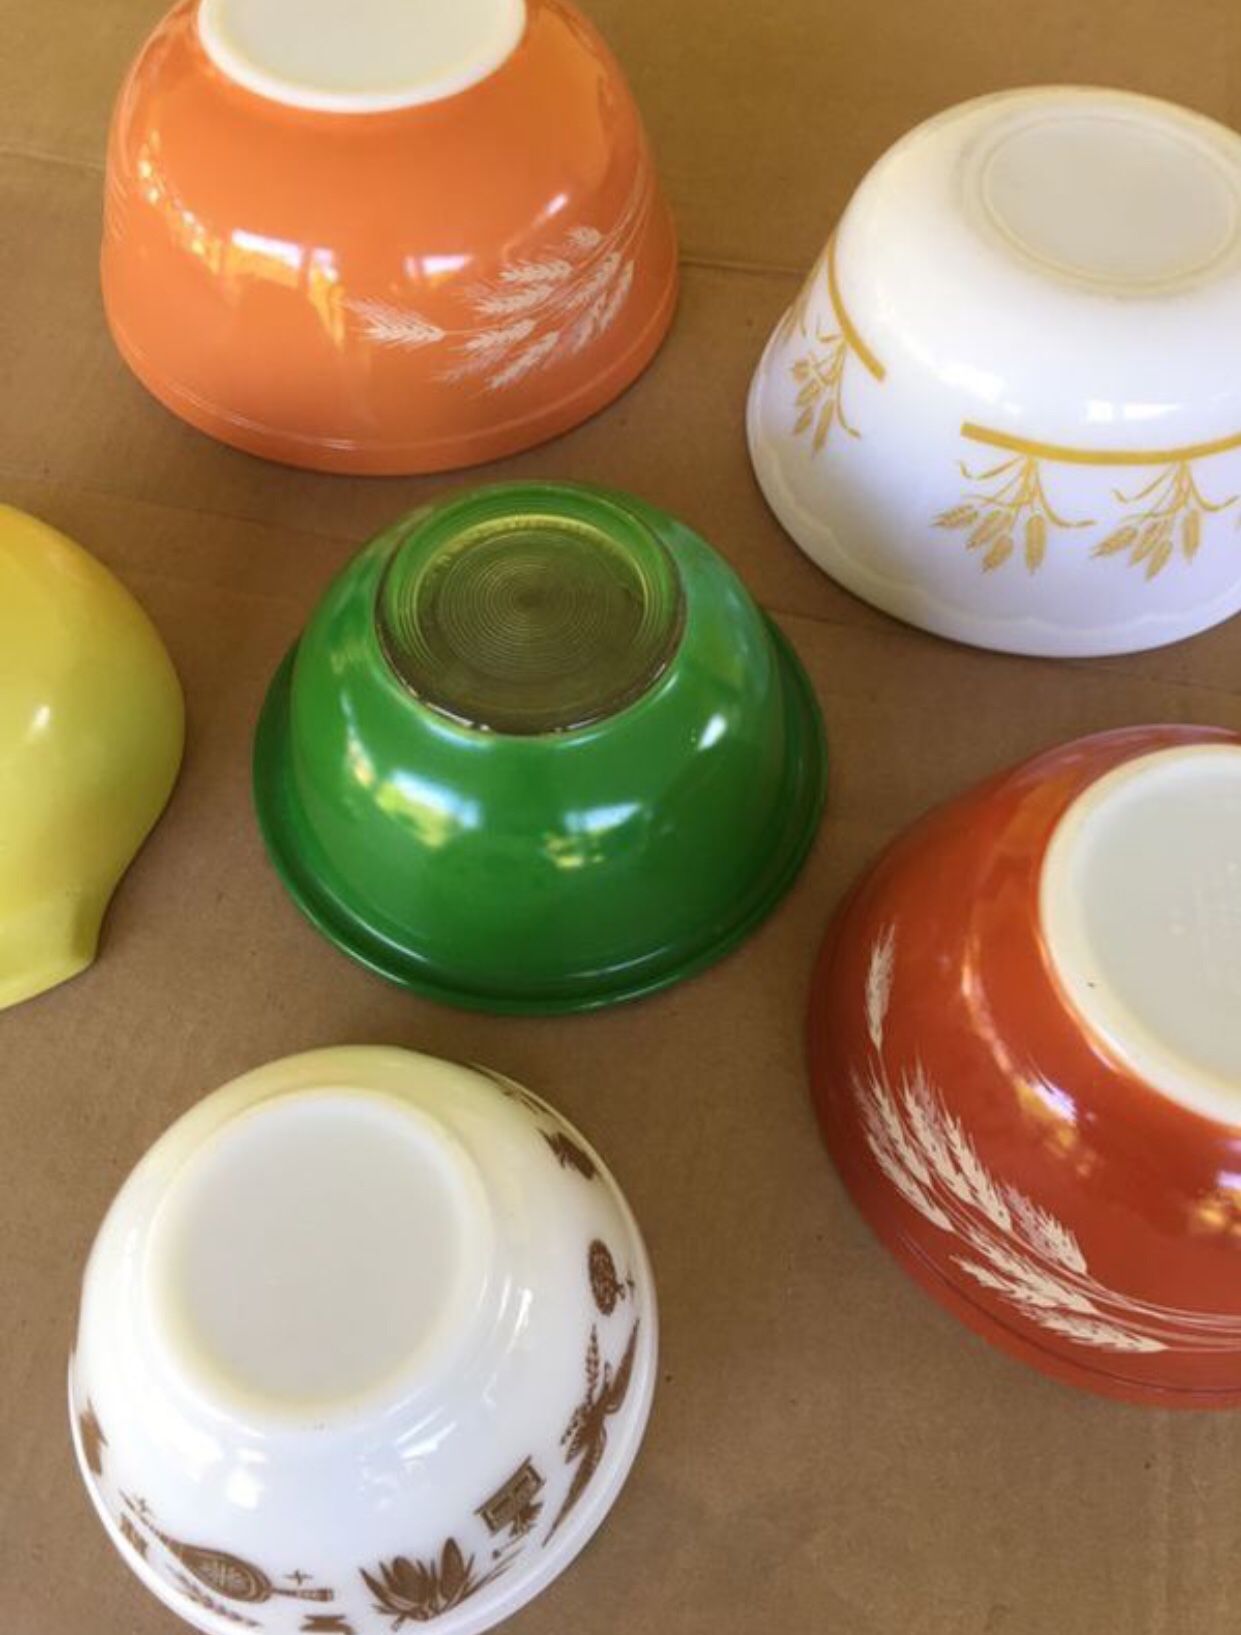 $15 EACH * Vintage 1960s PYREX Glass Mixing Bowls * 1970s